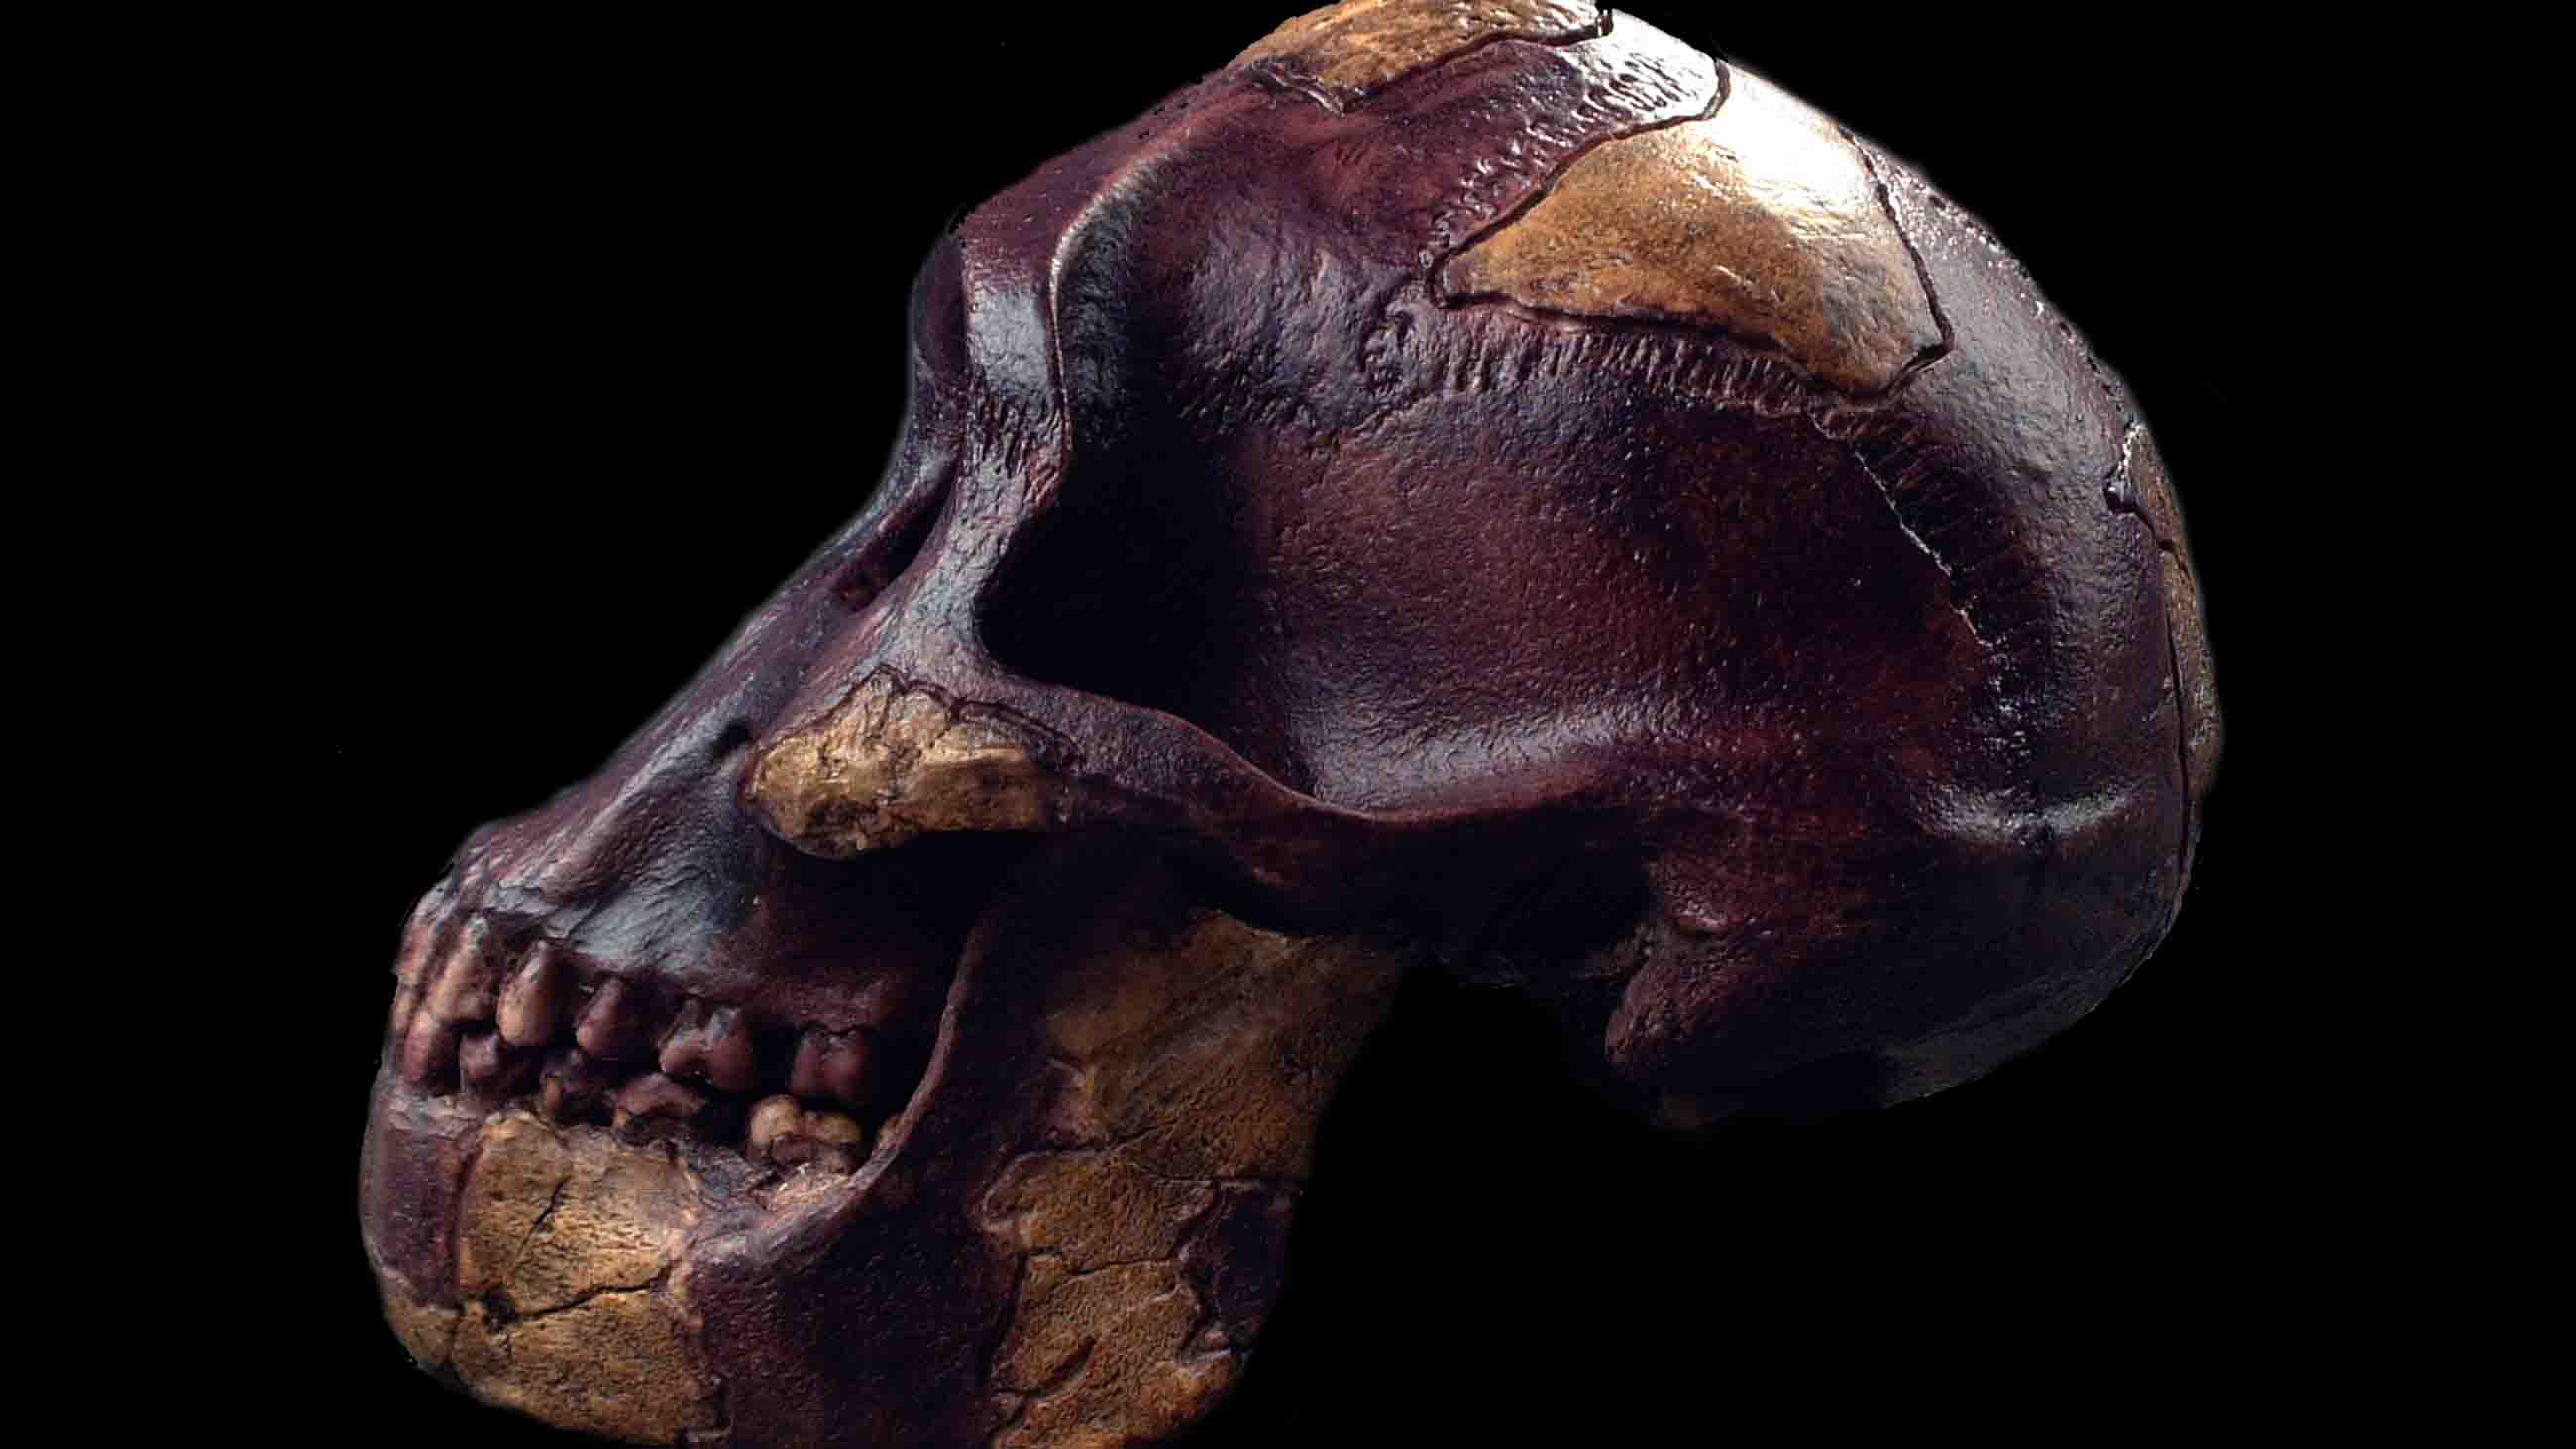 Australopithecus afarensis lived between 3.85 and 2.95 million years ago.